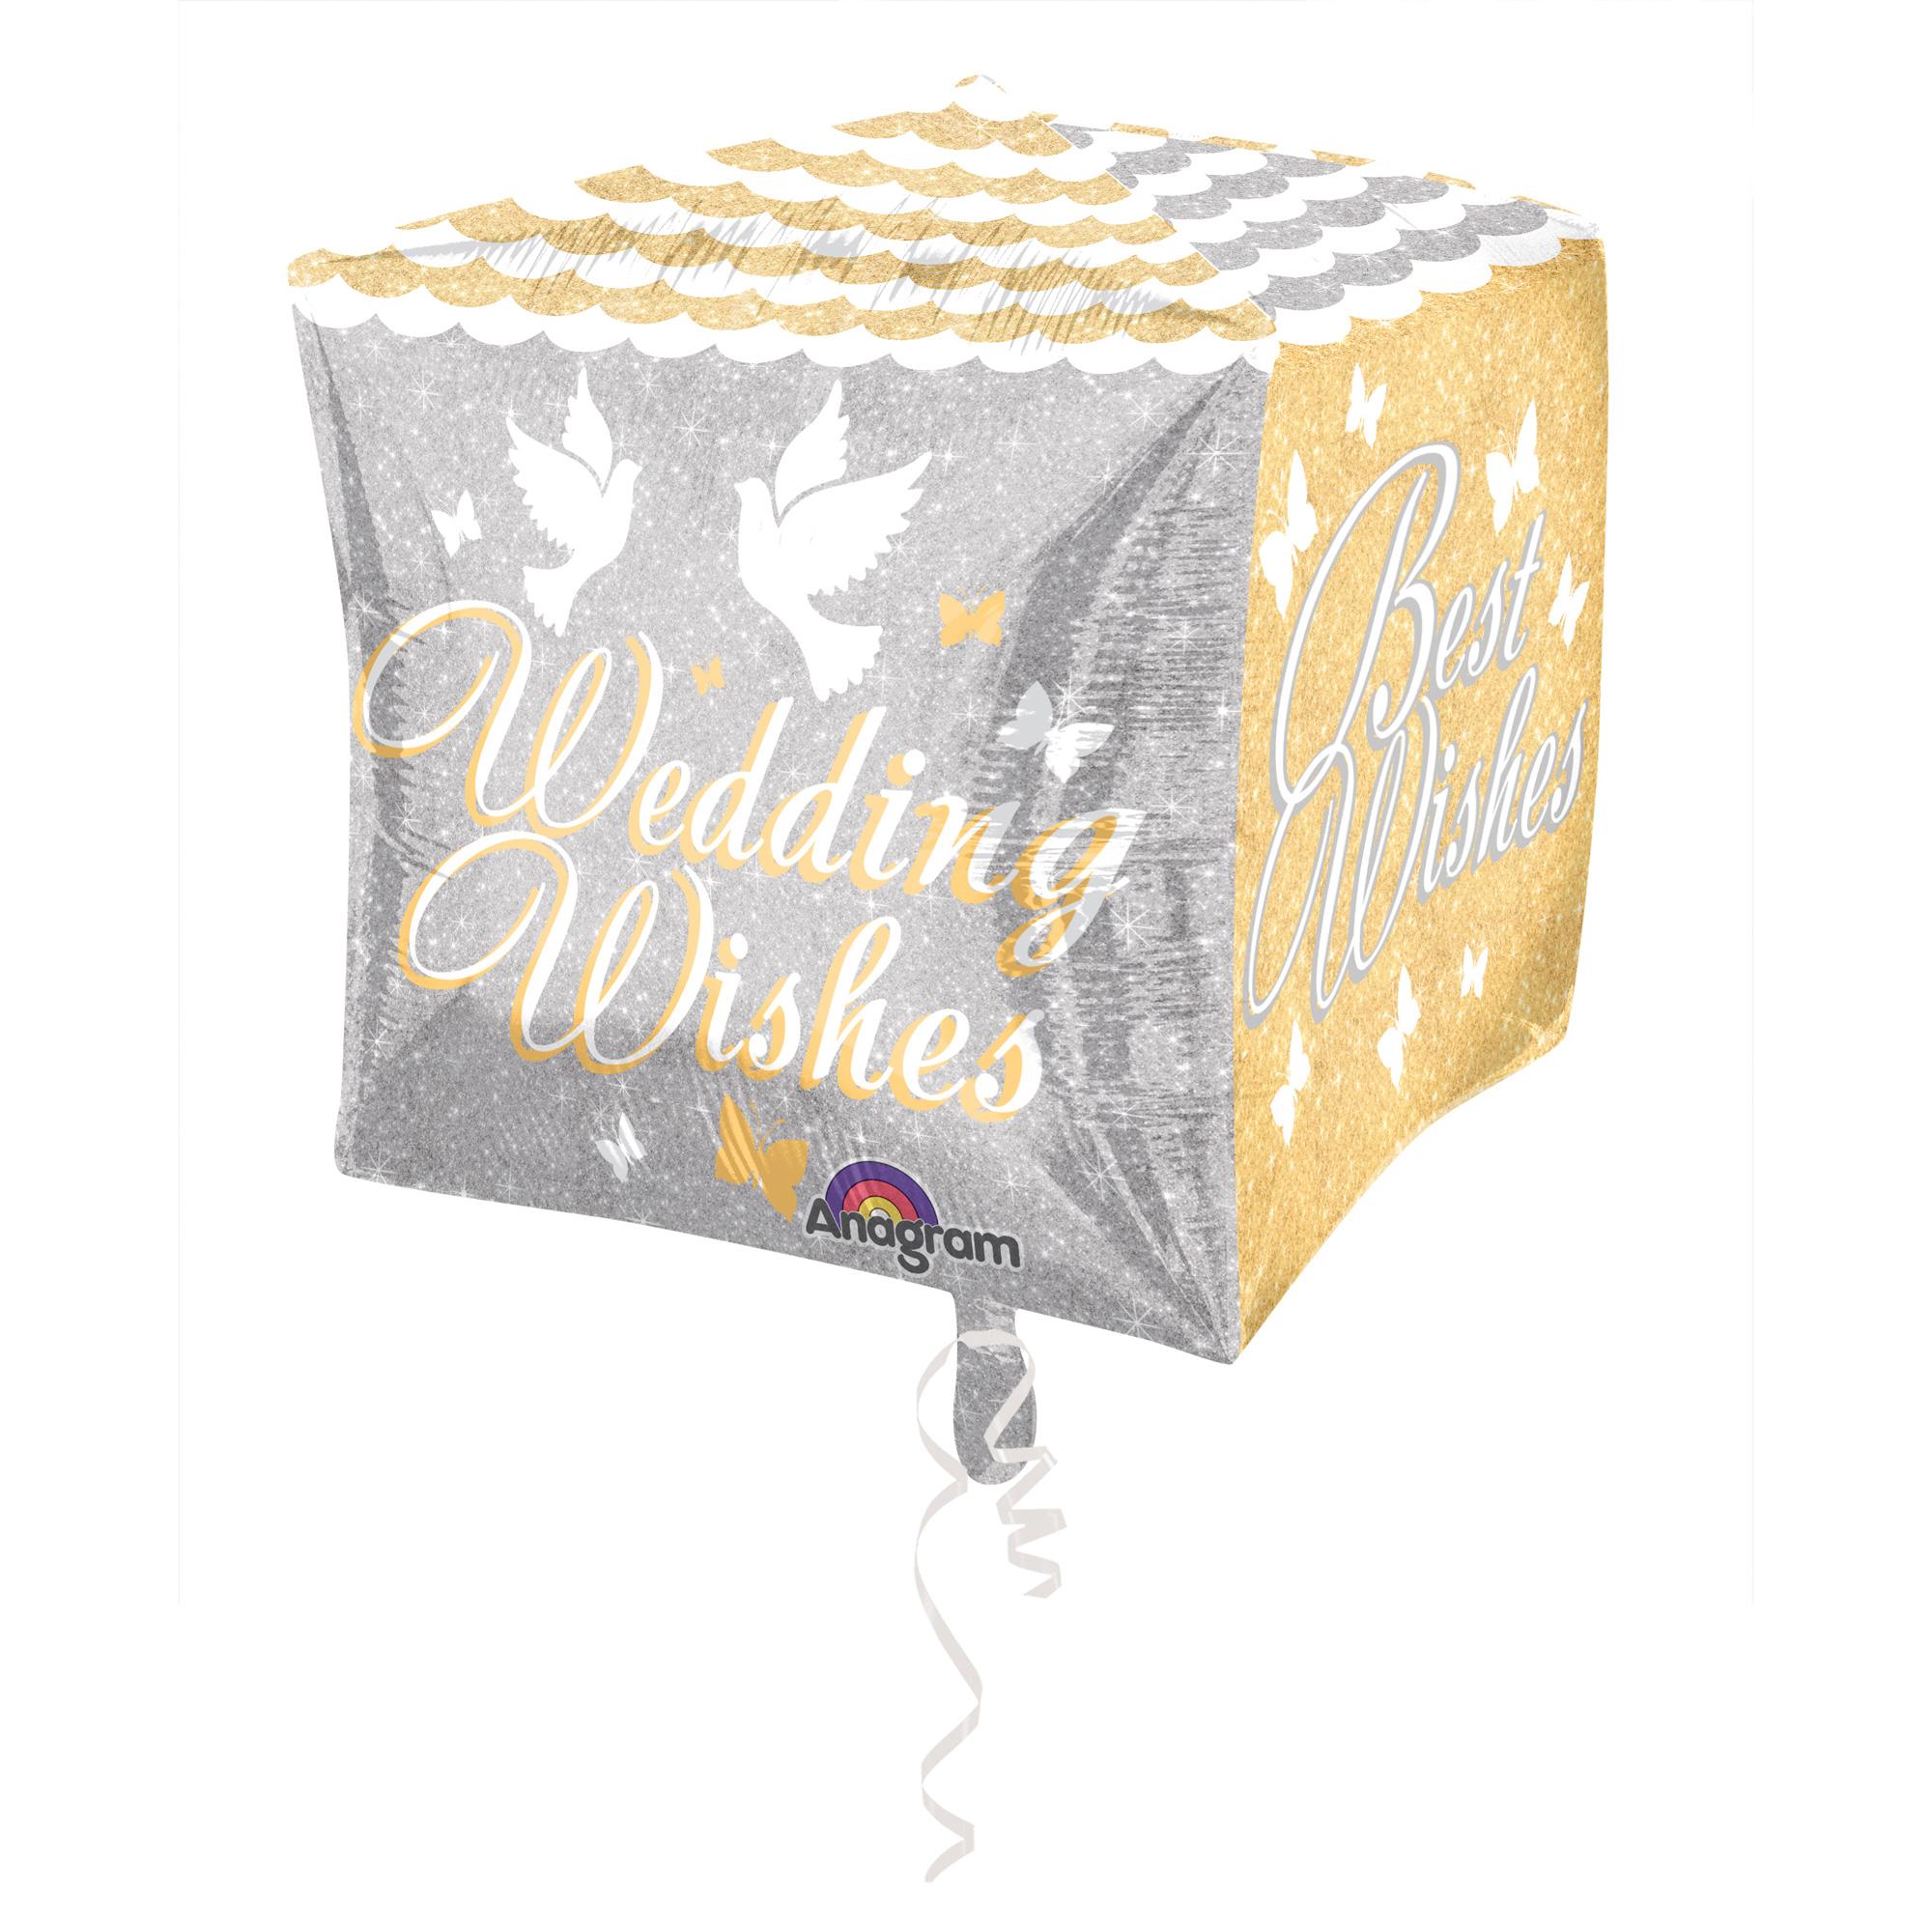 Shimmering Wedding Wishes Cubez Foil Balloon Balloons & Streamers - Party Centre